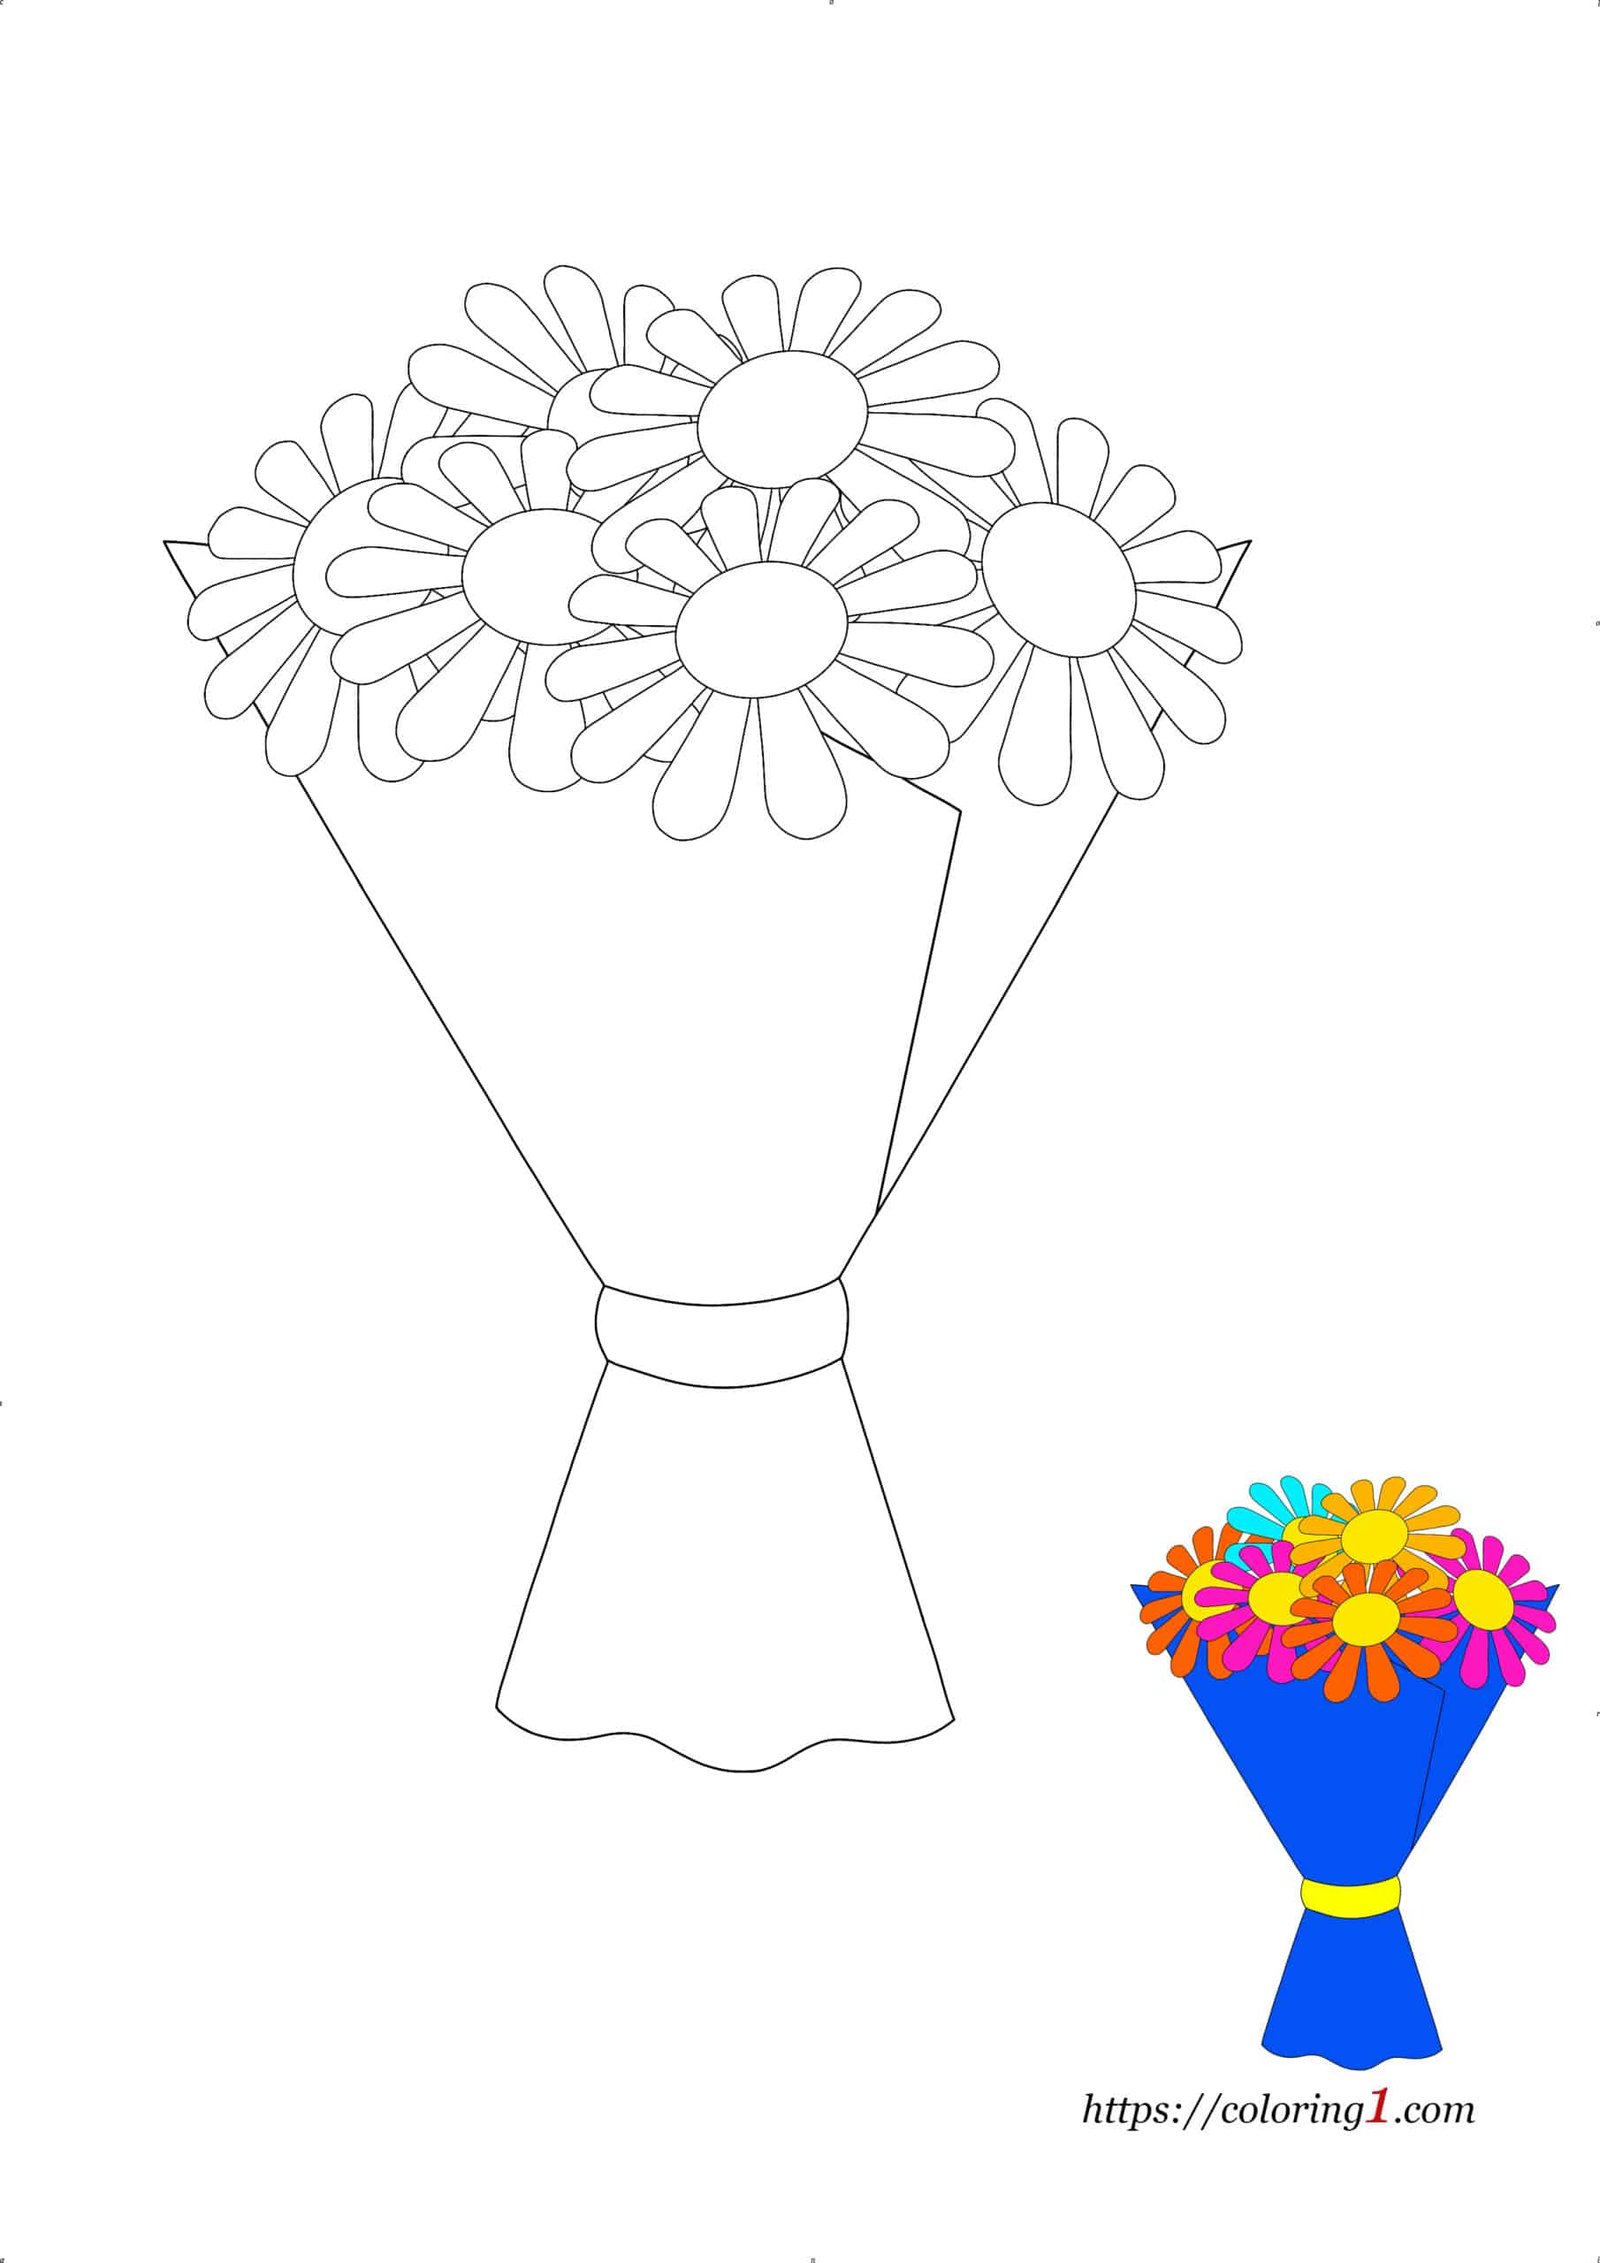 Flower Bouquet free online coloring page to print out